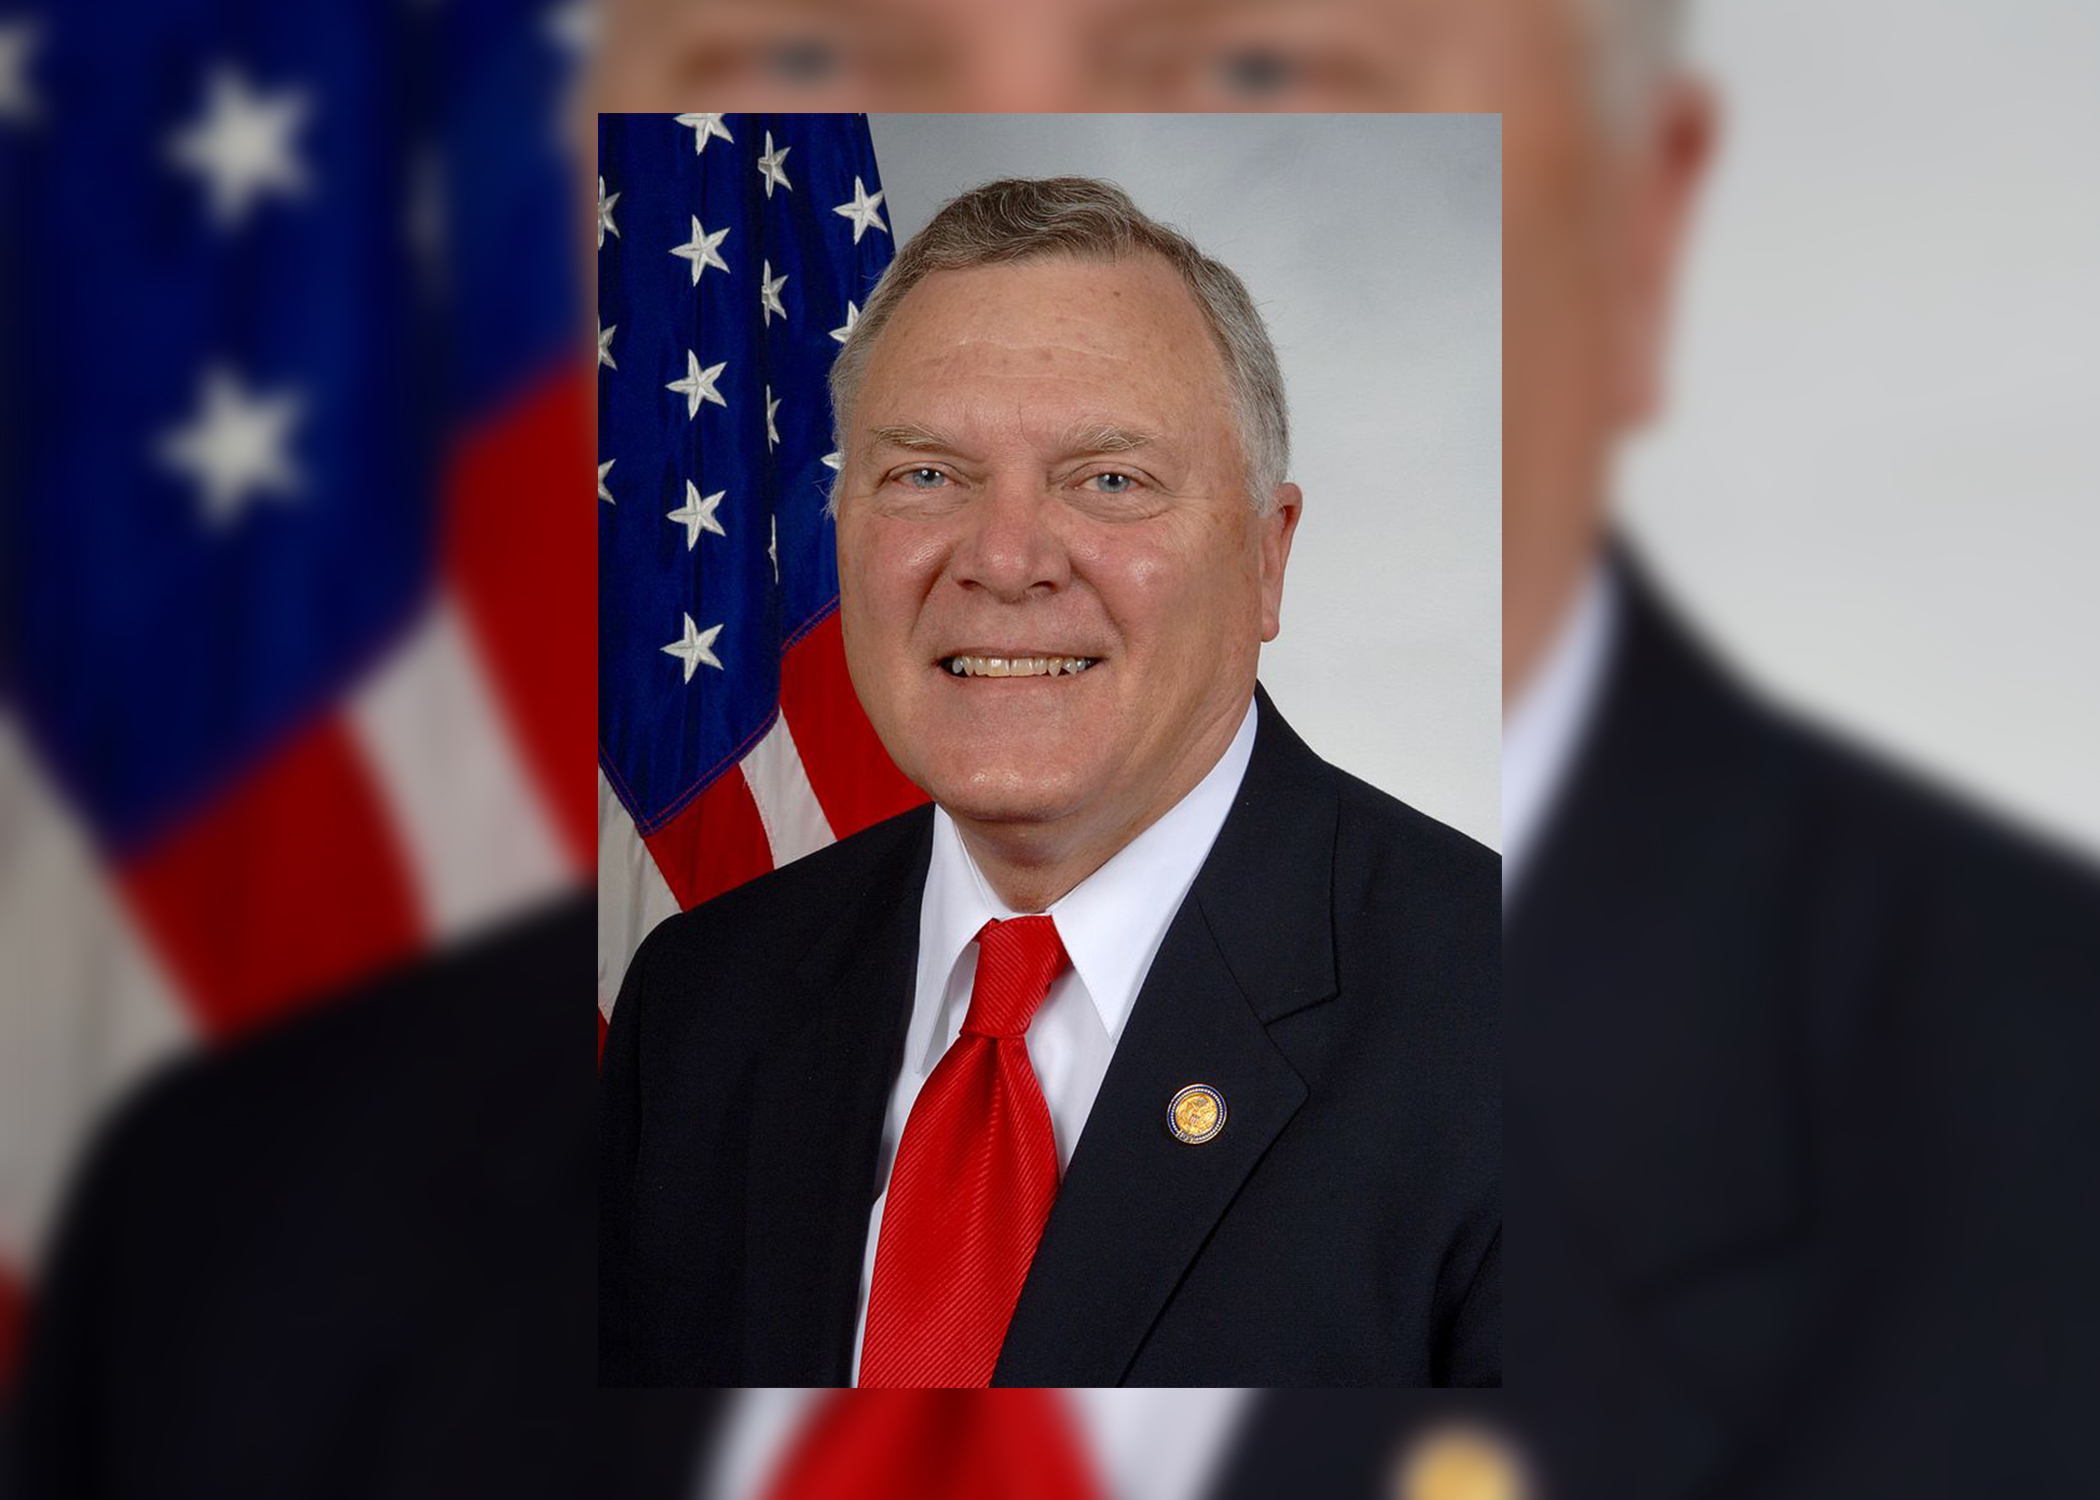 Former Georgia Governor Nathan Deal to hold lectures at USG universities